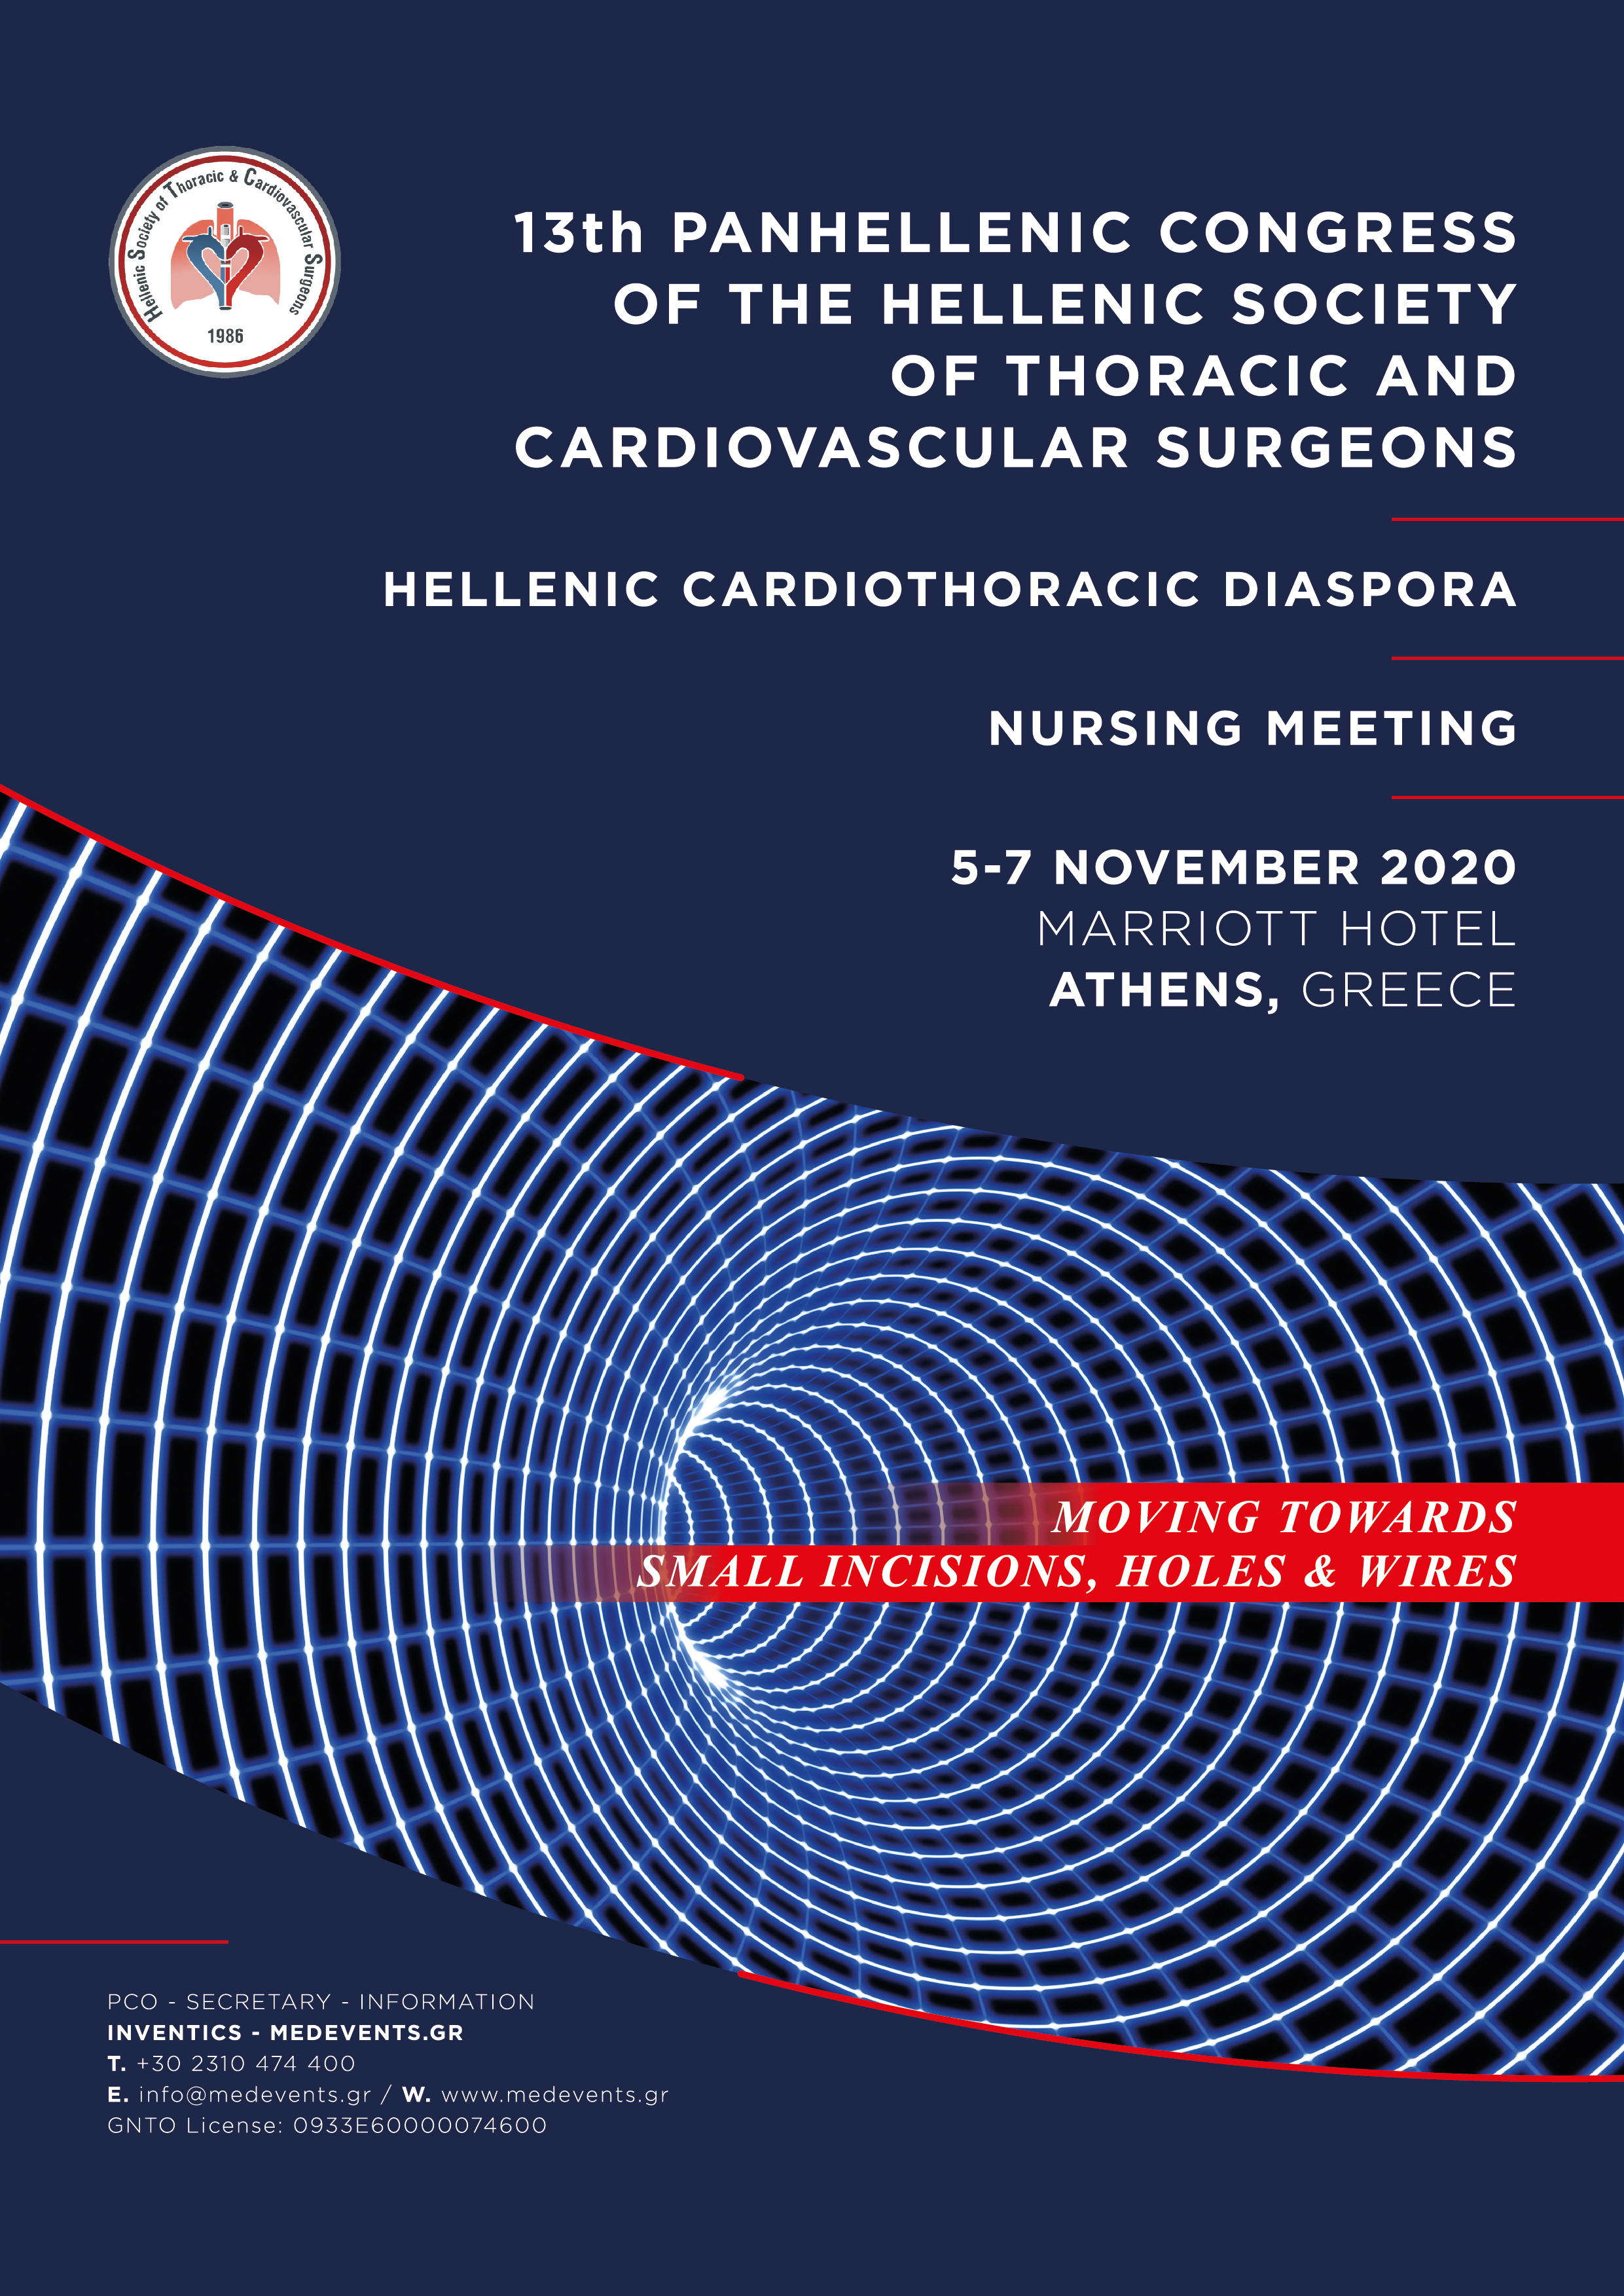 13th Panhellenic Congress of the Hellenic Society of Thoracic & Cardiovascular Surgeons